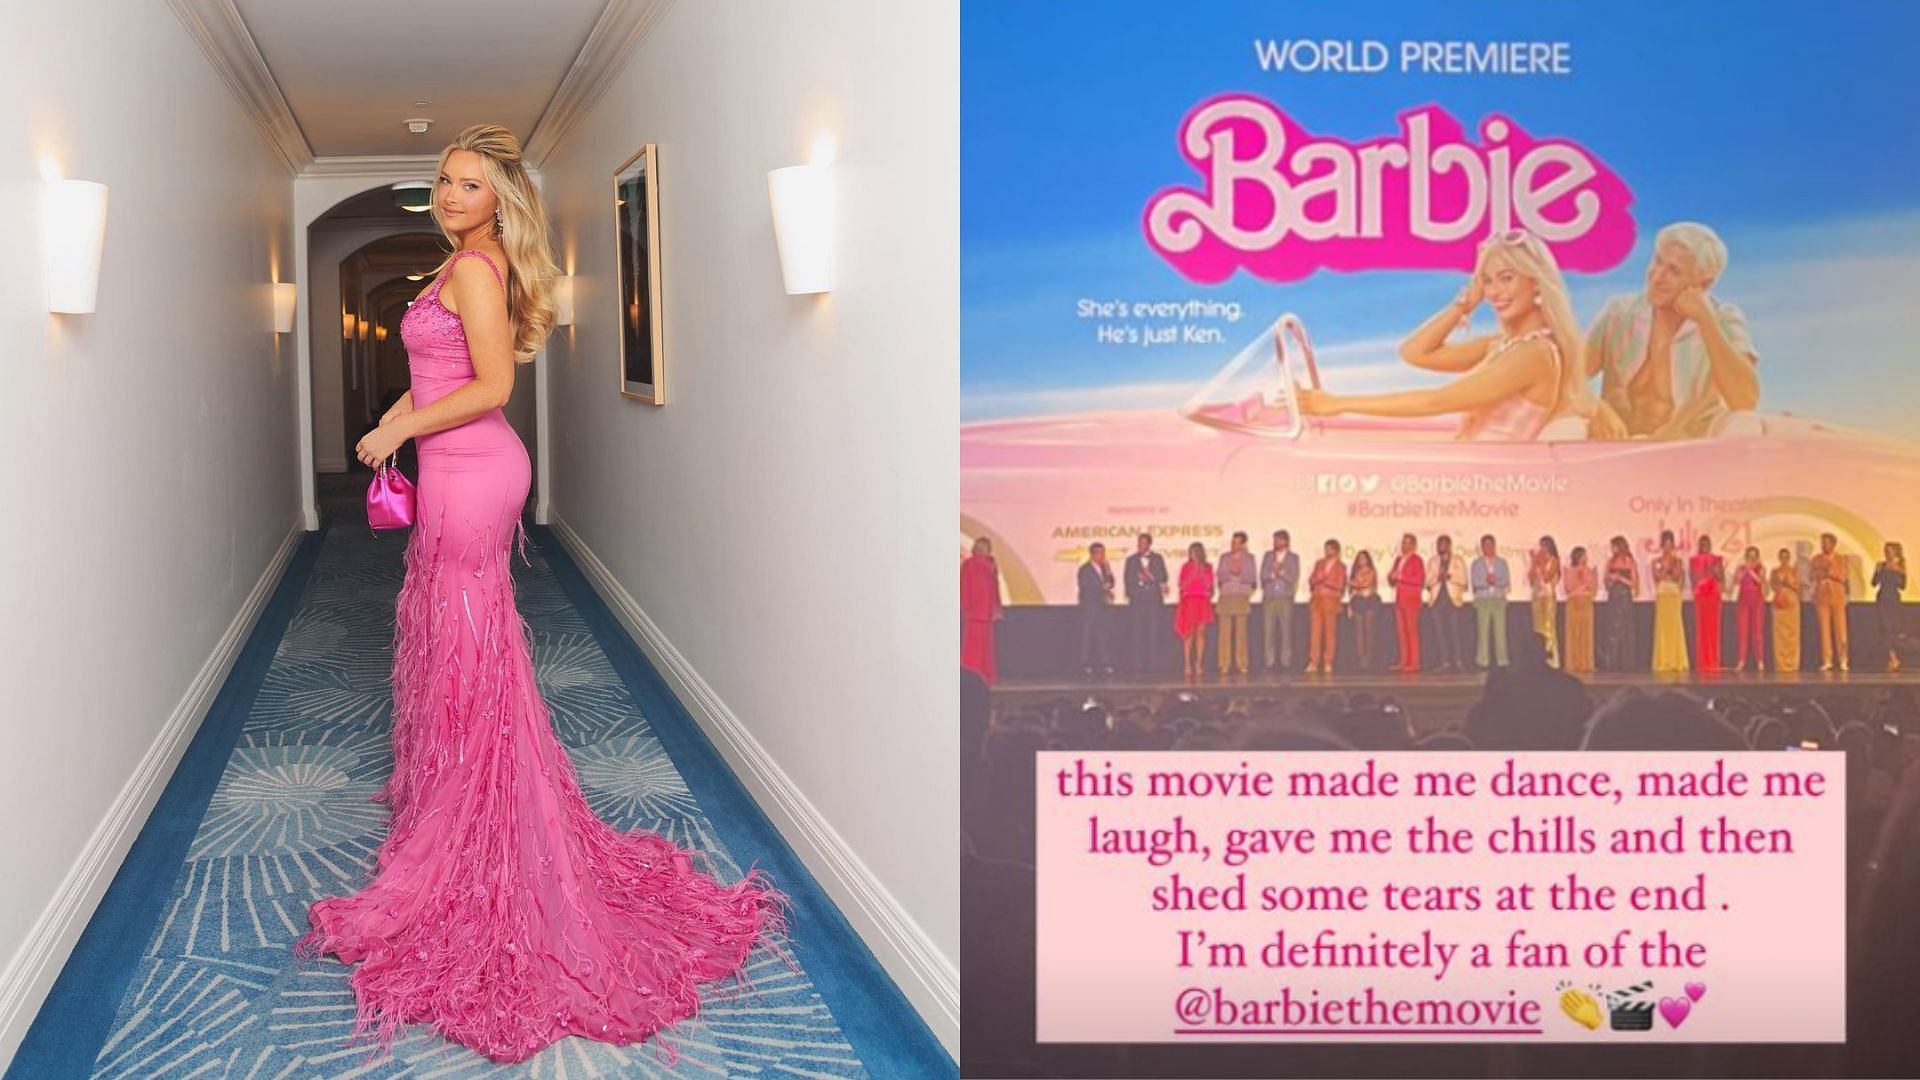 Camille Kostek gave review of the Barbie movie. 